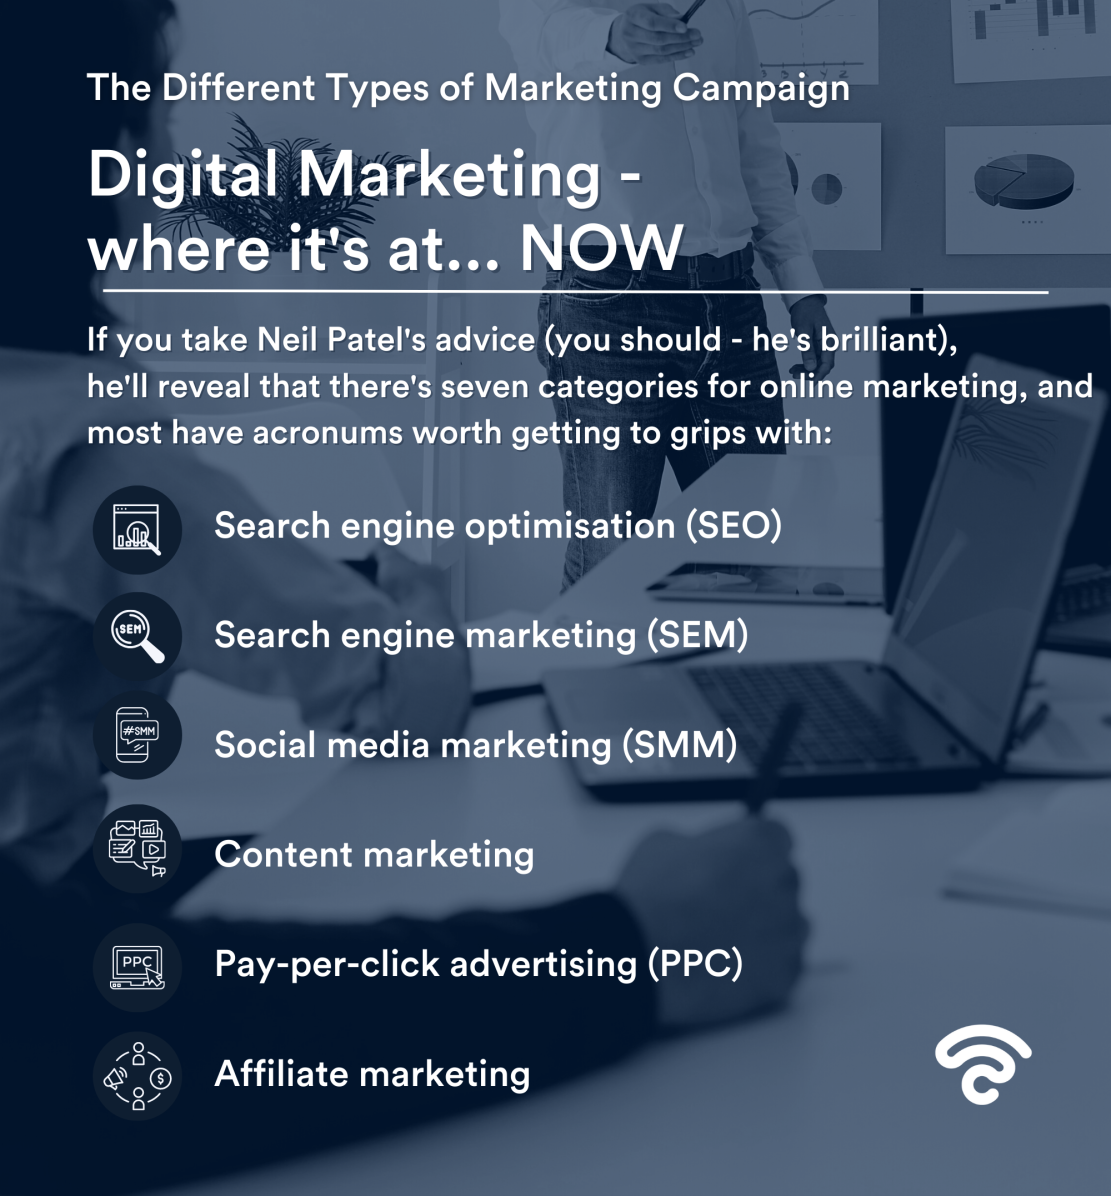 Digital Marketing - where it s at... NOW